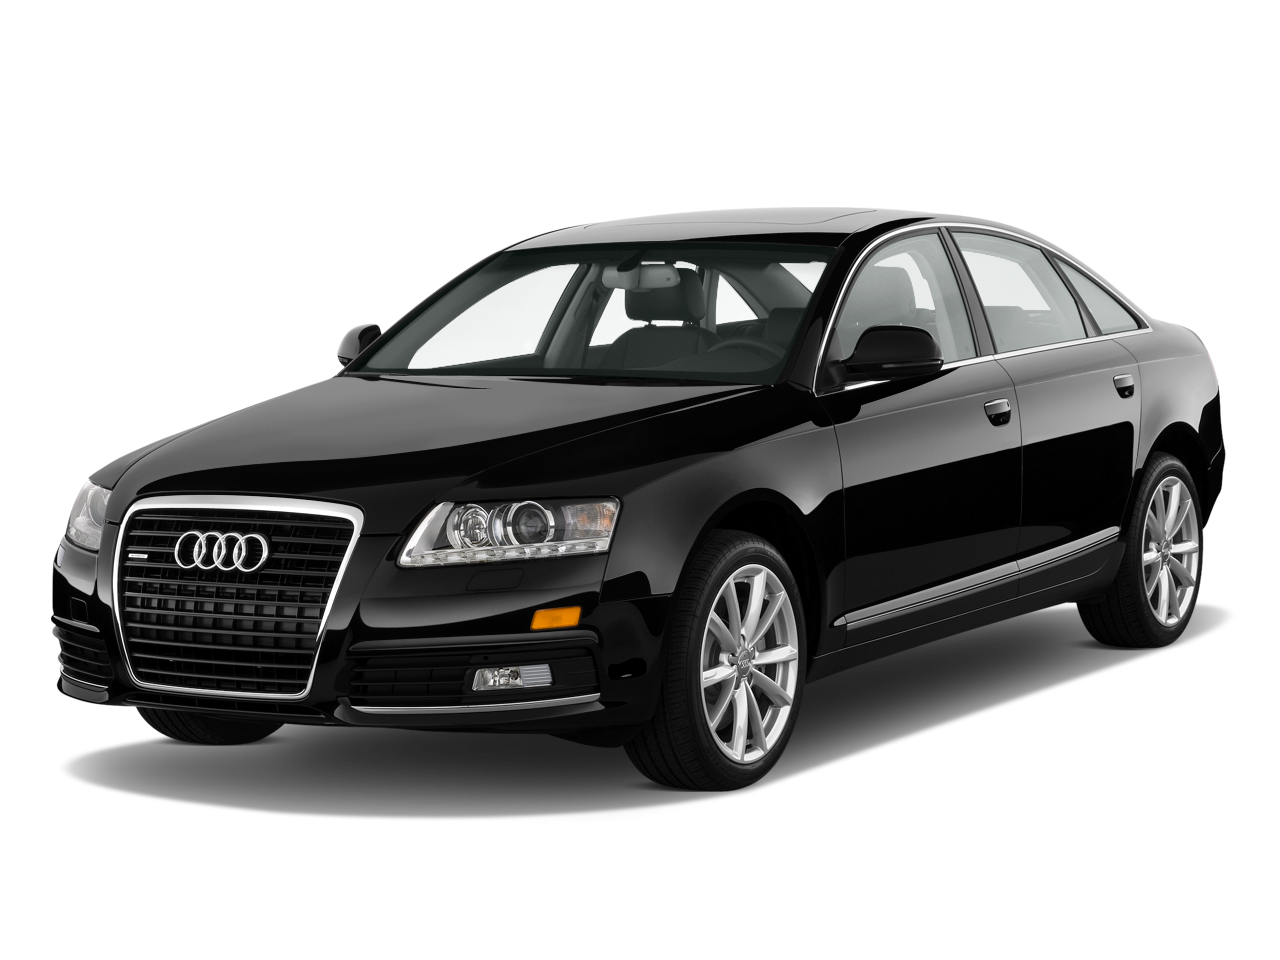 2009 Audi A6 Prices, Reviews, and Photos - MotorTrend